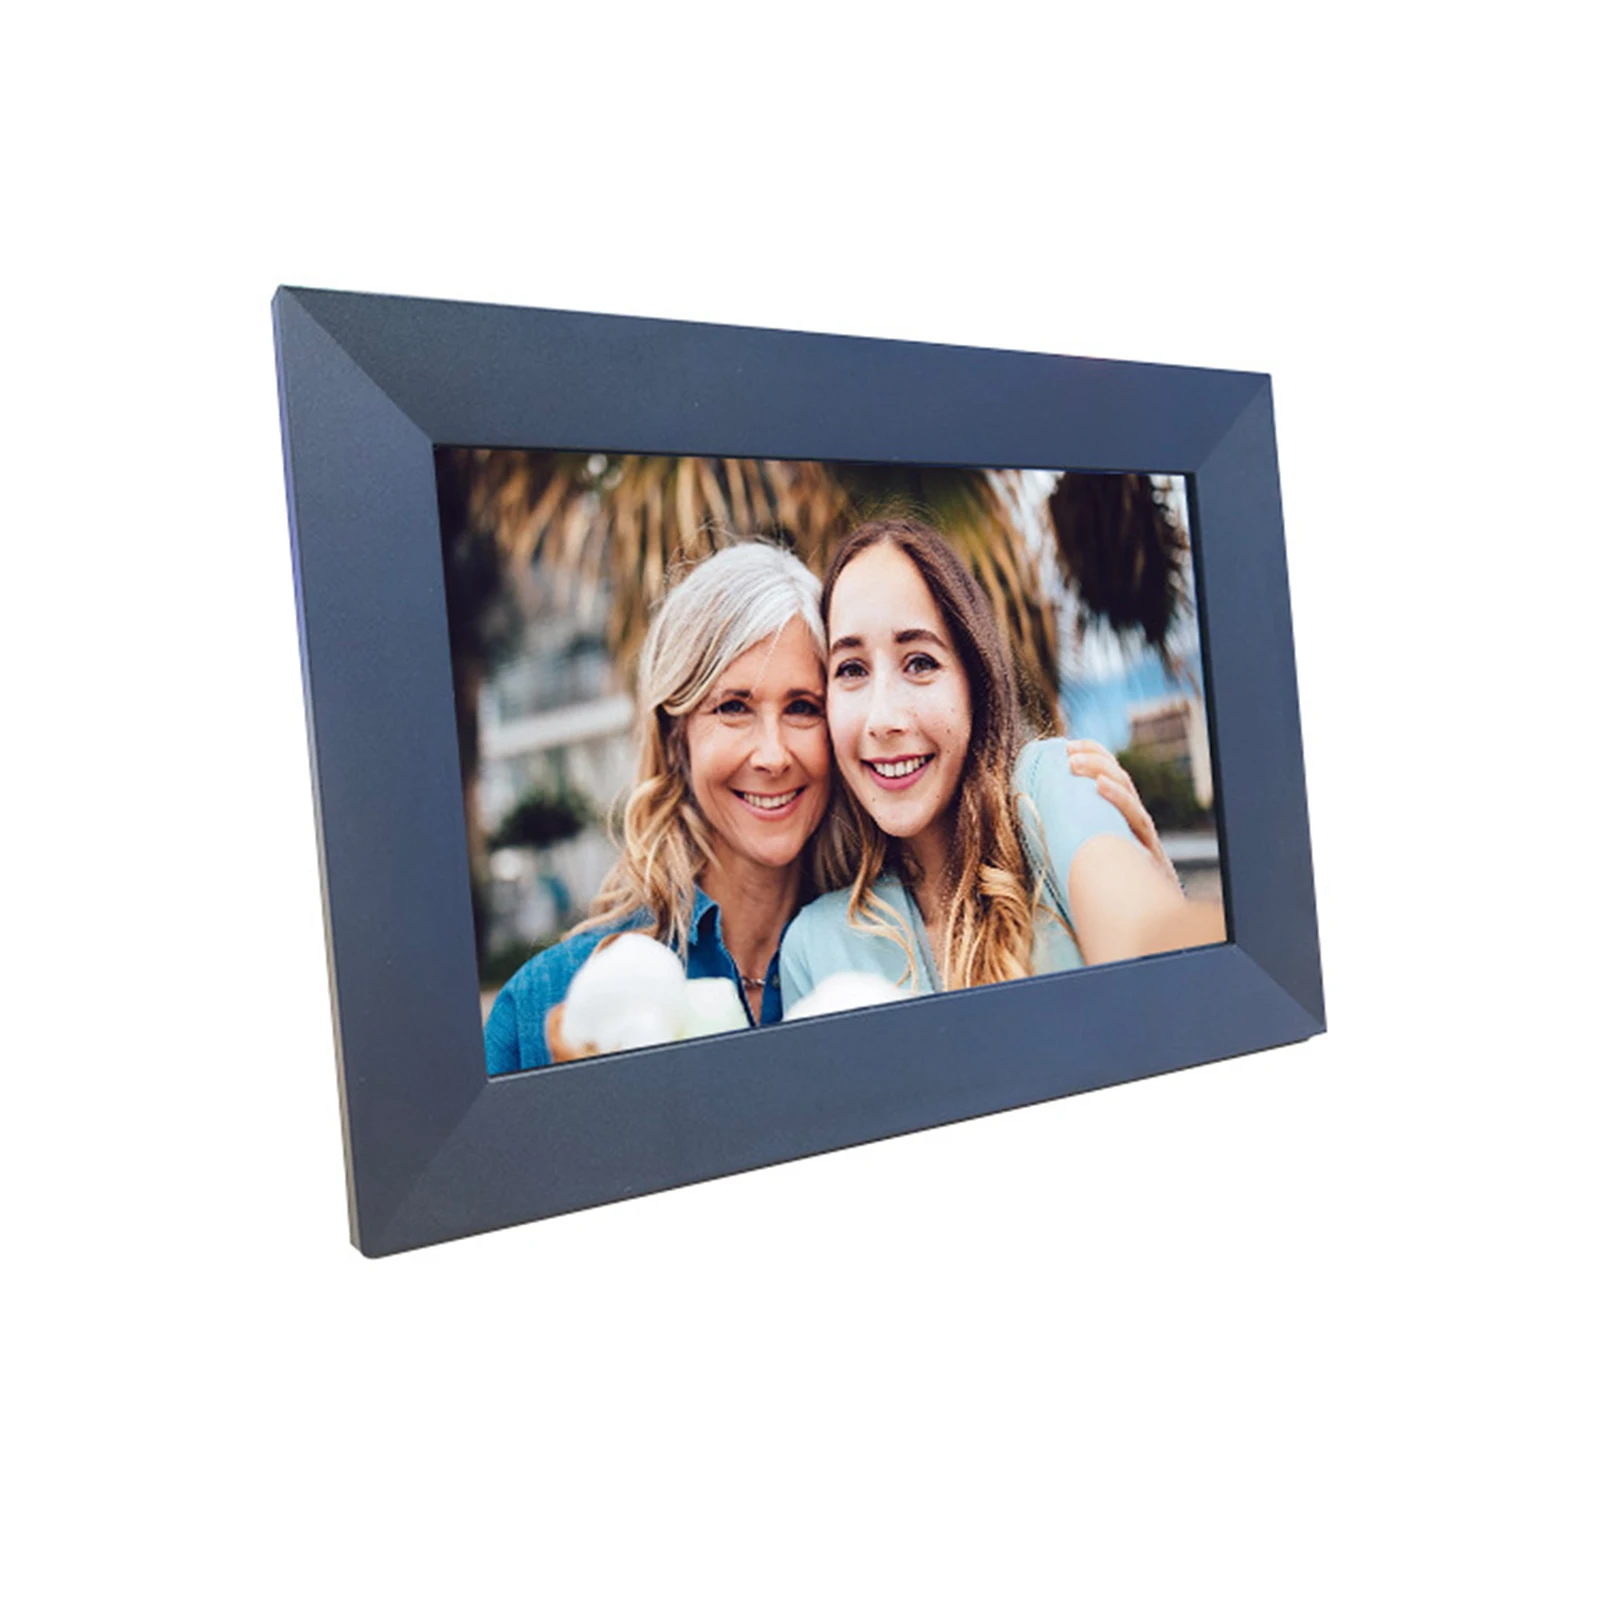 

8inch WiFi Digital Picture Frame High Definition Touch Screen Wireless Share Photos Frame Smart Cloud Photo Frame Home Decor